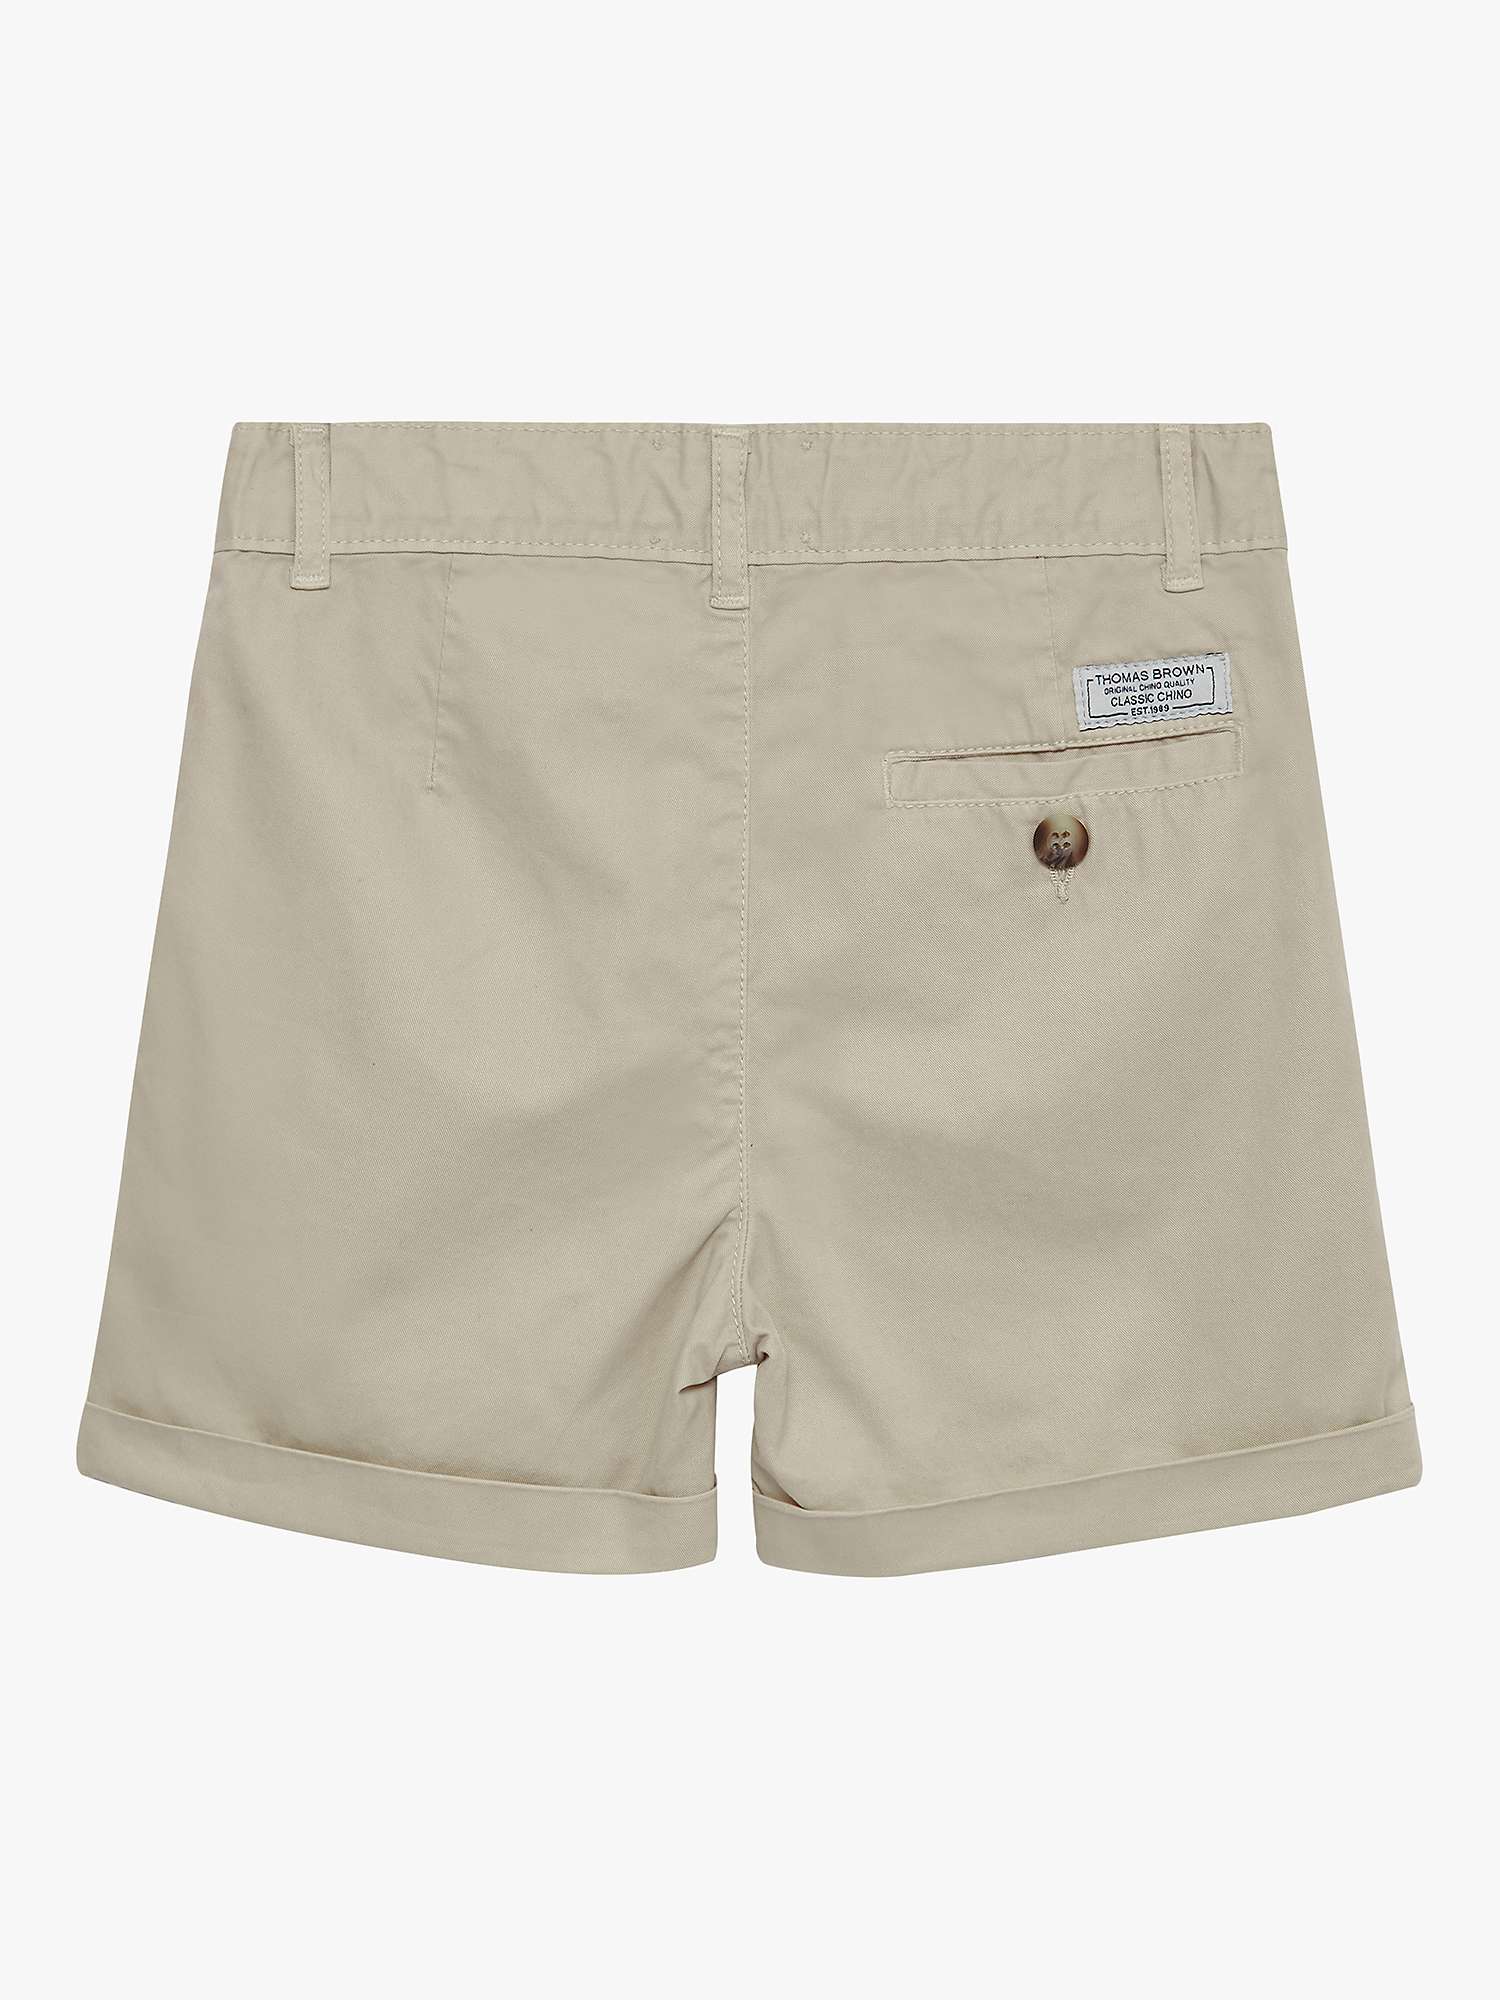 Buy Trotters Thomas Brown Kids' Charlie Chino Shorts Online at johnlewis.com